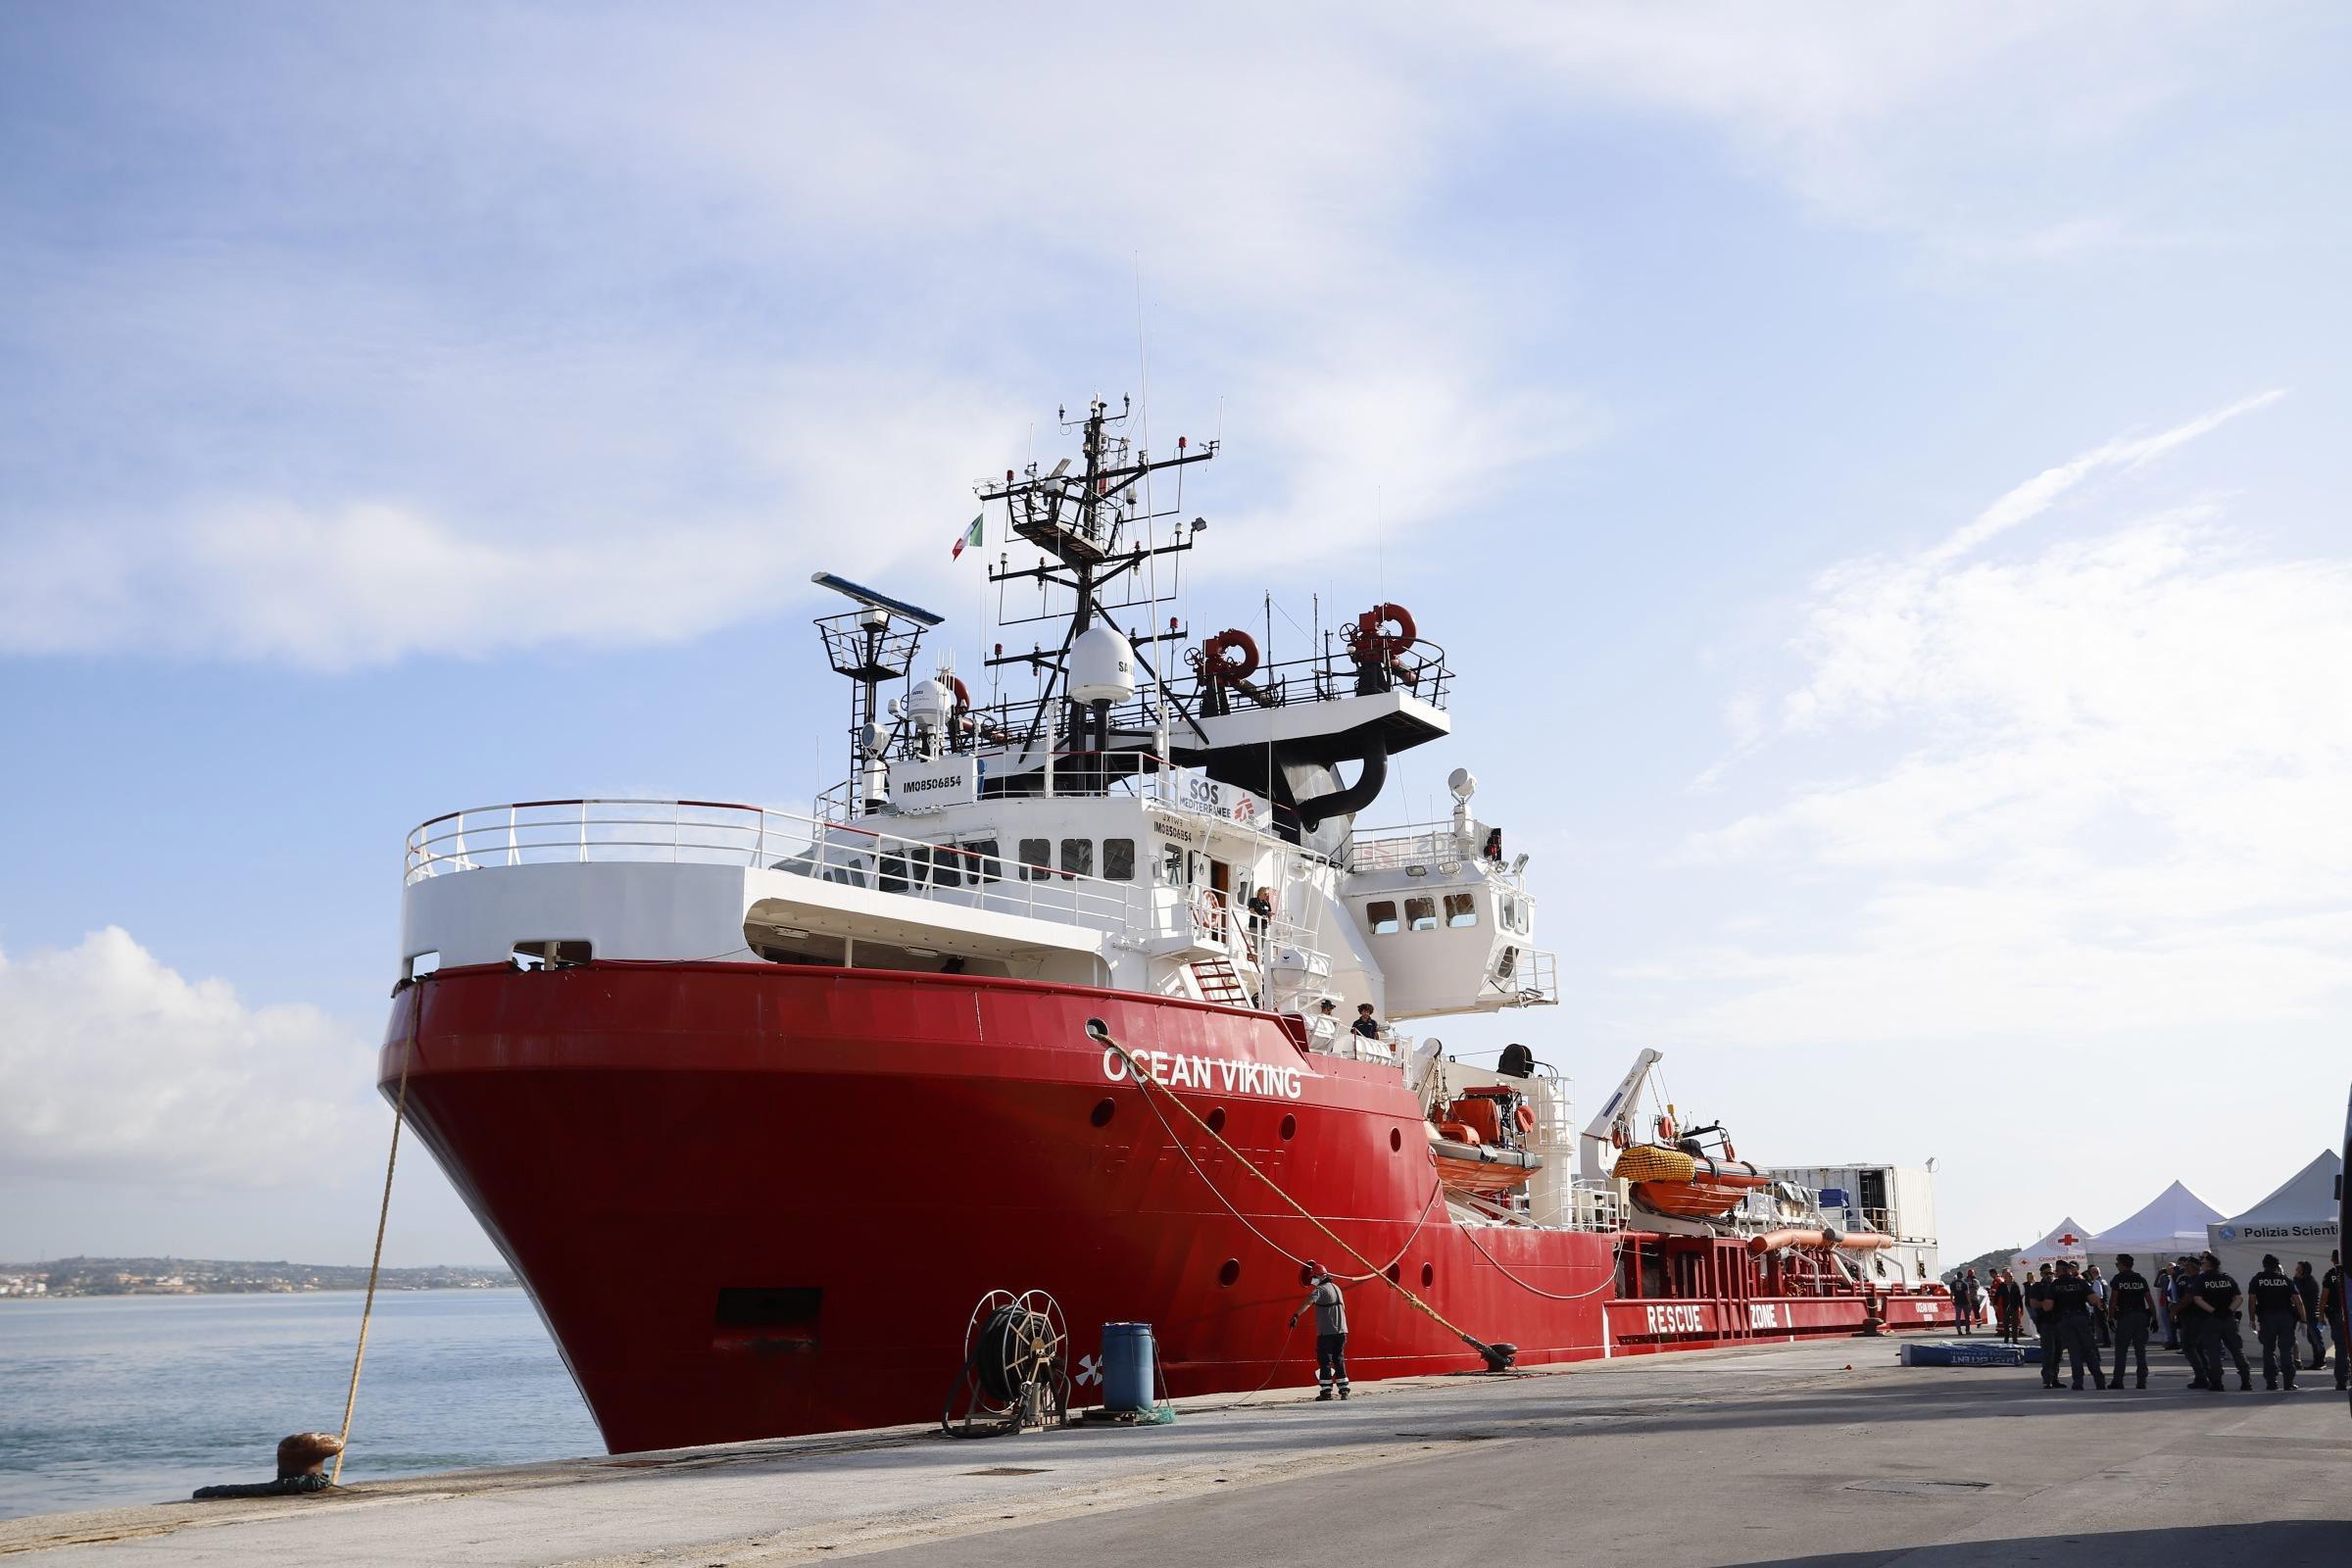 epa07959386 The search-and-rescue ship Ocean Viking arrives in the port of Pozzallo, Italy, 30 October 2019. The rescue ship, chartered by SOS Mediterrranee in partnership with Medecins Sans Frontieres (MSF), rescued 104 migrants in international waters off the coasts of Libya on 18 October 2019.  EPA/FRANCESCO RUTA